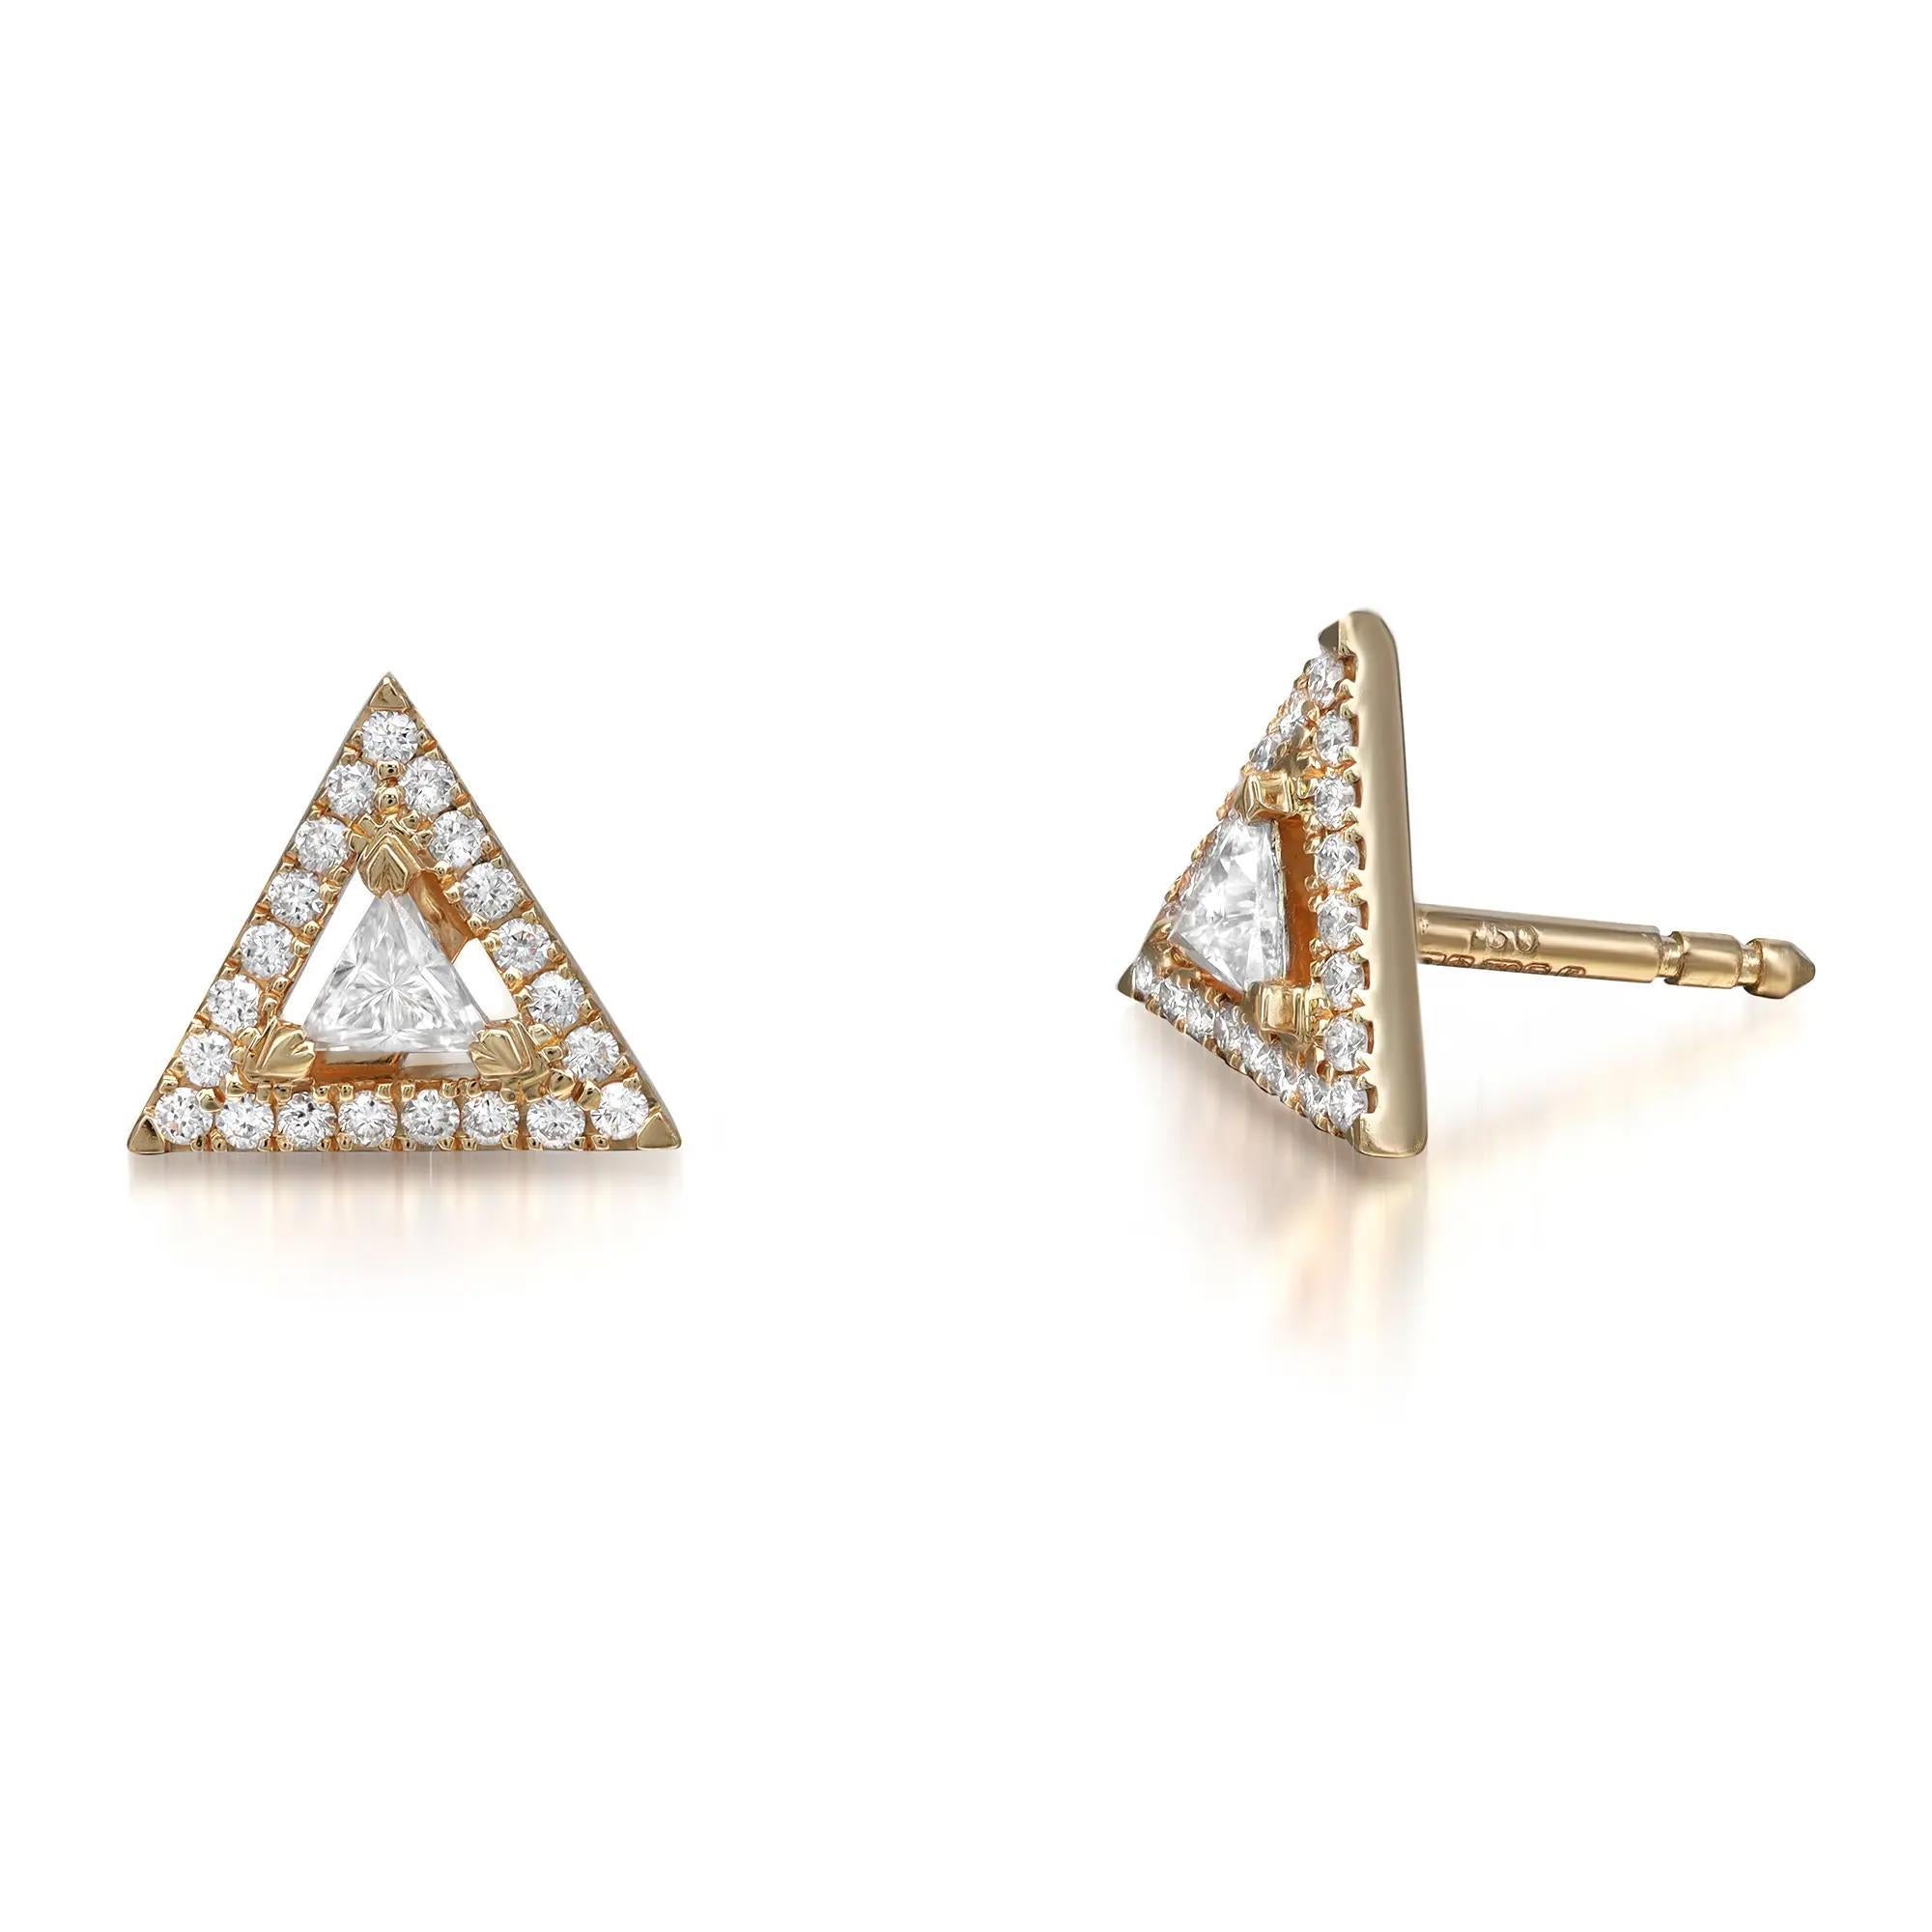 Brighten up your ear game with these sparkling Messika Thea diamond stud earrings. Crafted in 18K yellow gold. Features center prong set triangular diamond with round cut diamond halo weighing 0.32 carat. Diamond color G and clarity VS. Chic,